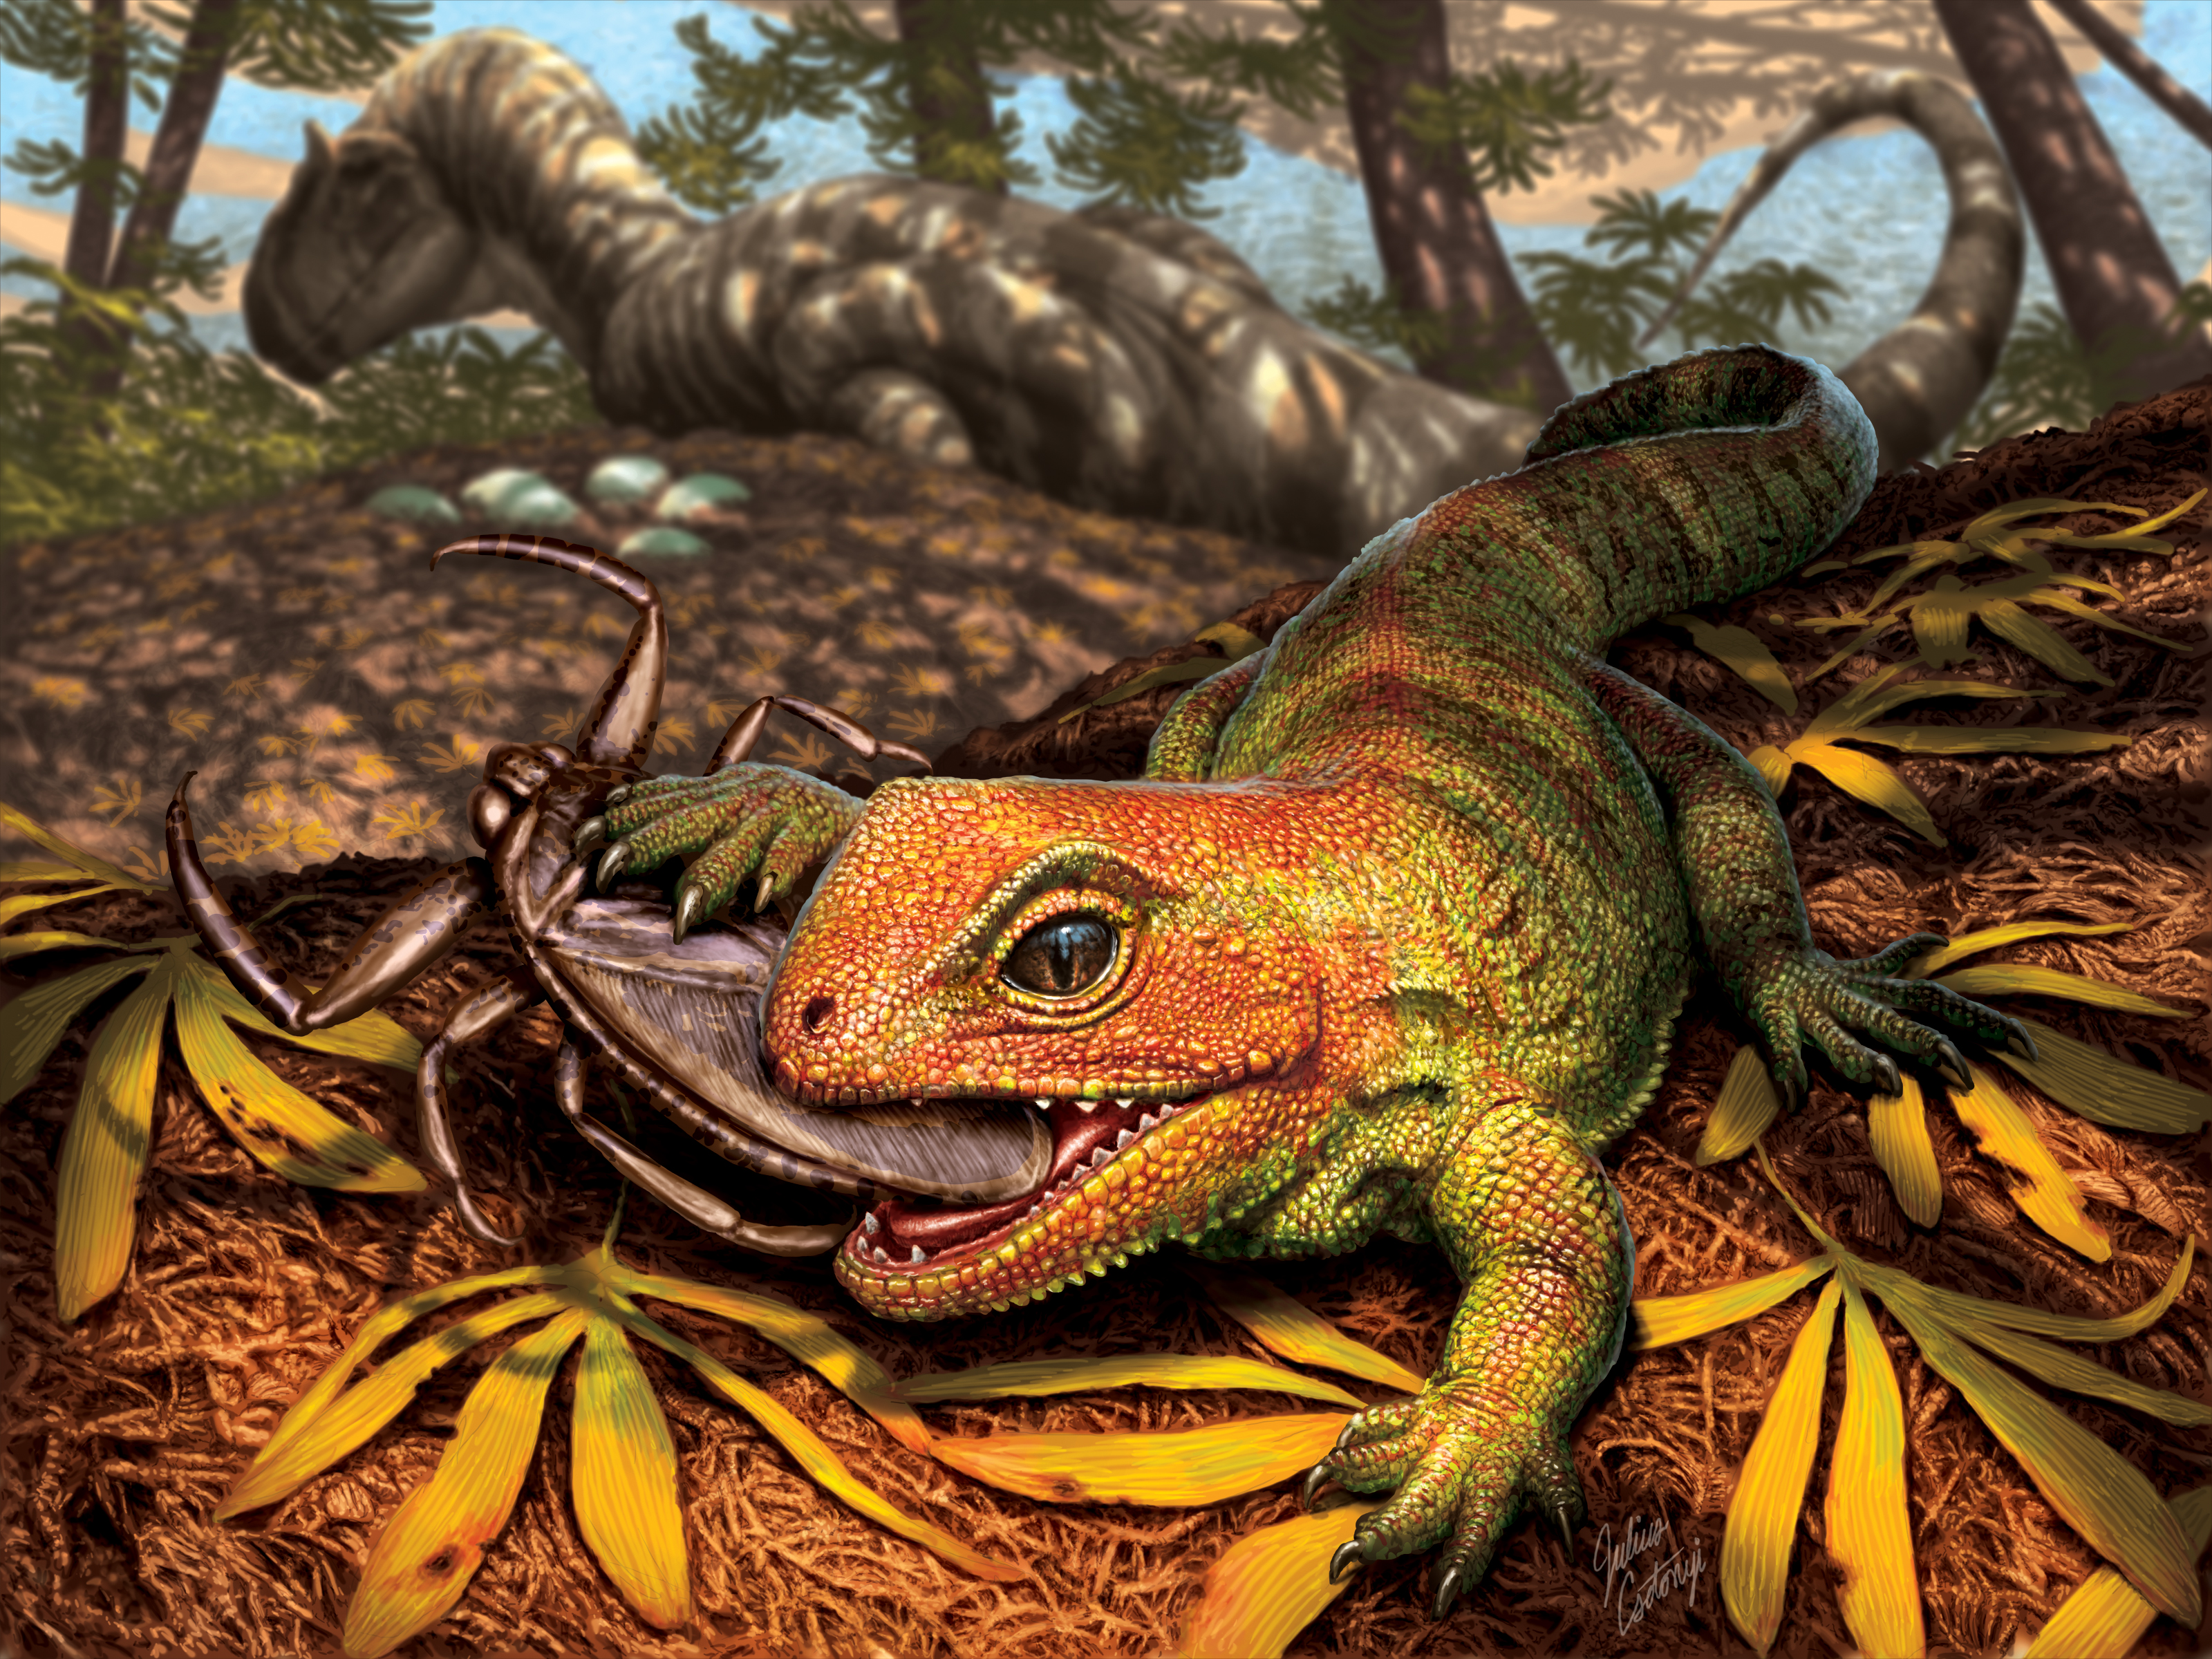 Smithsonian Researchers Discover Extinct Prehistoric Reptile That Lived  Among Dinosaurs | Smithsonian Institution